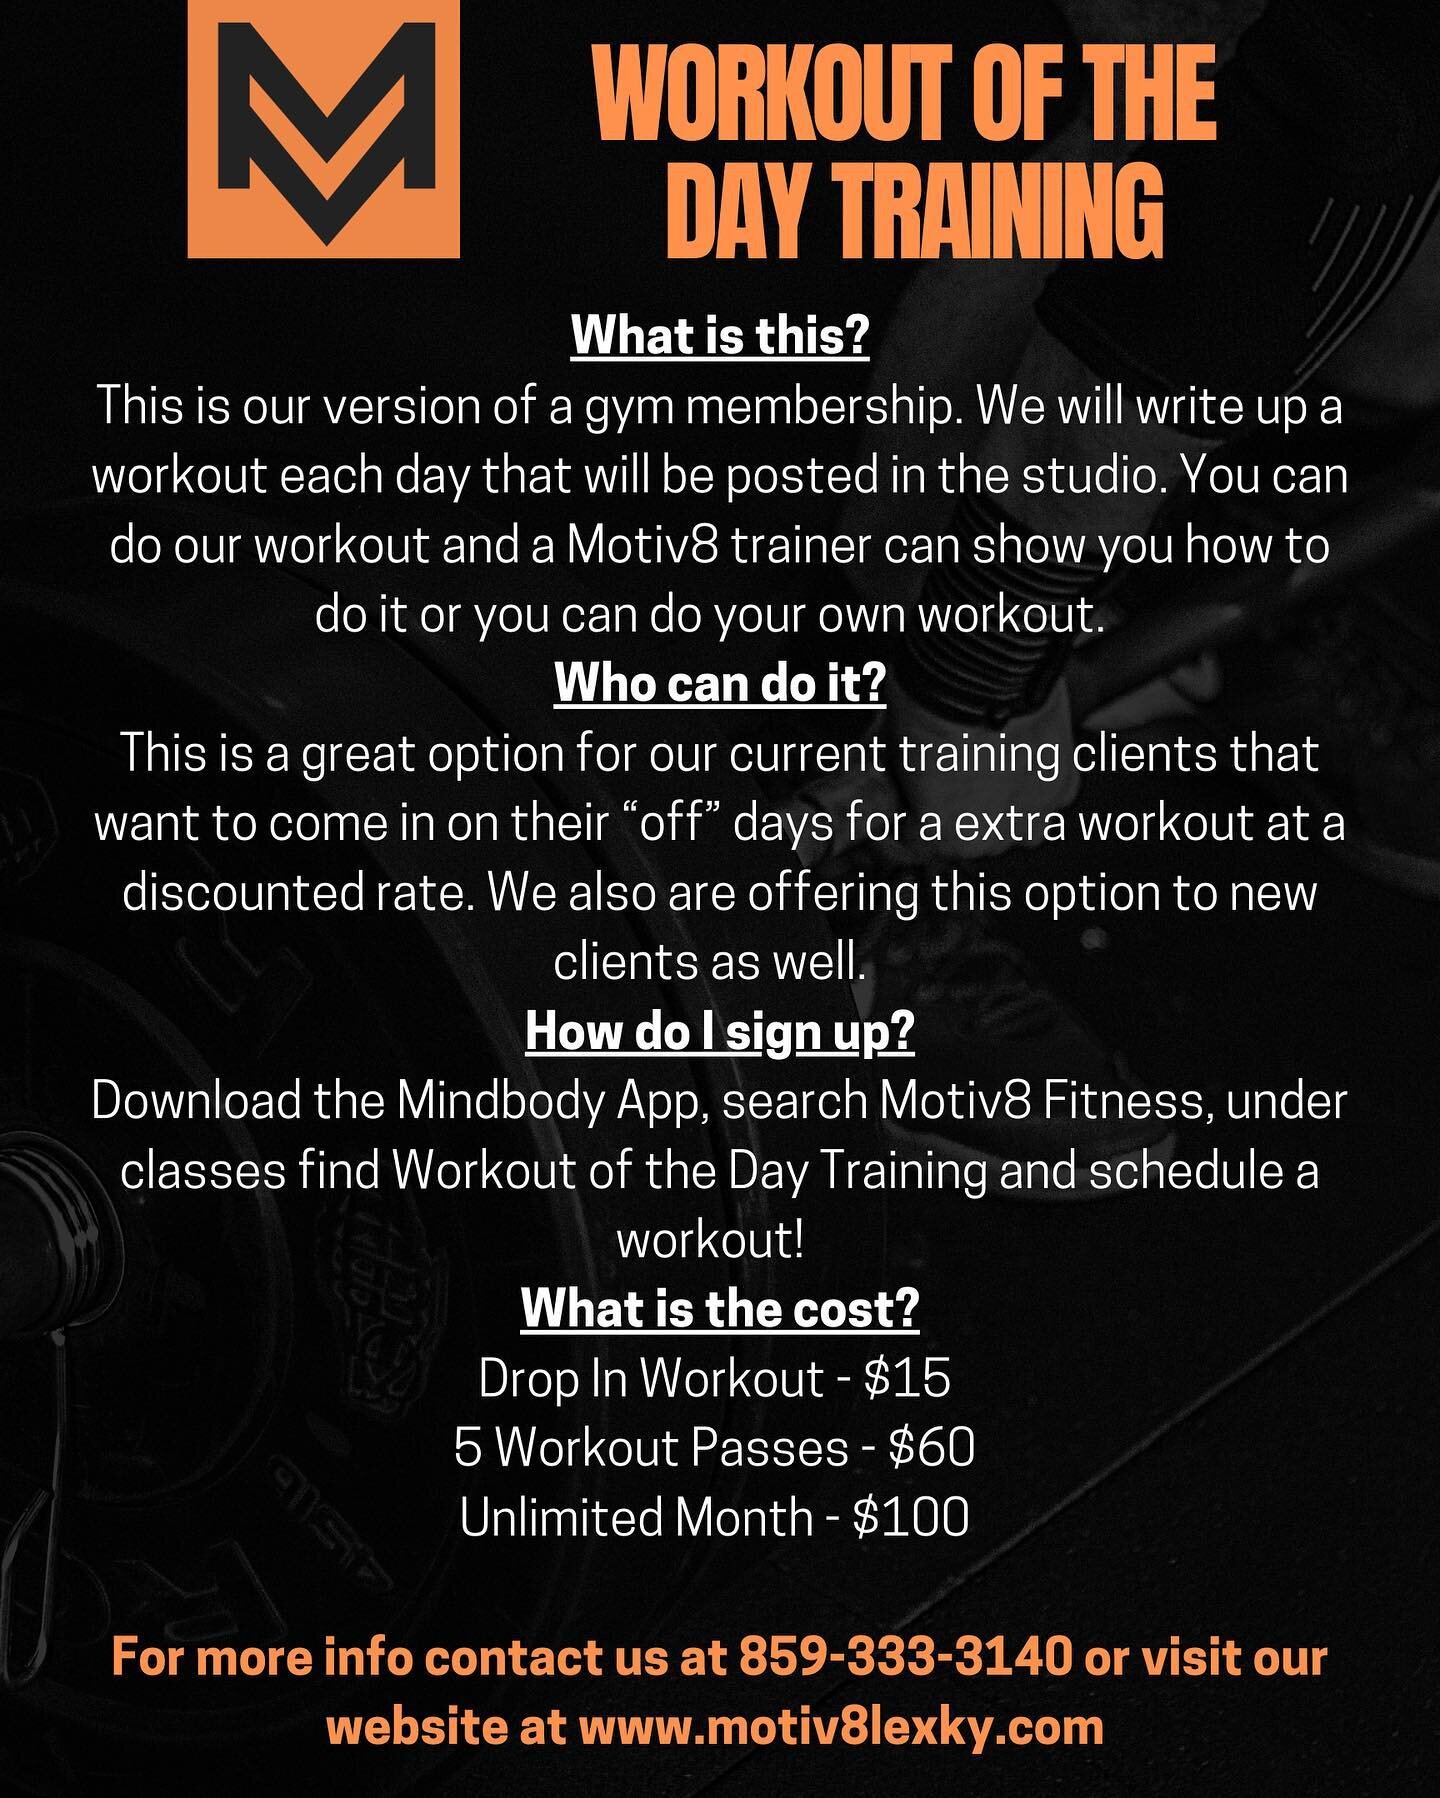 Are you someone who has a gym membership and you never use it? Not sure what to do or how to workout safely? Do you want to have the accountability from a personal trainer? 

Introducing Workout Of The Day Training! 

This is our version of a members